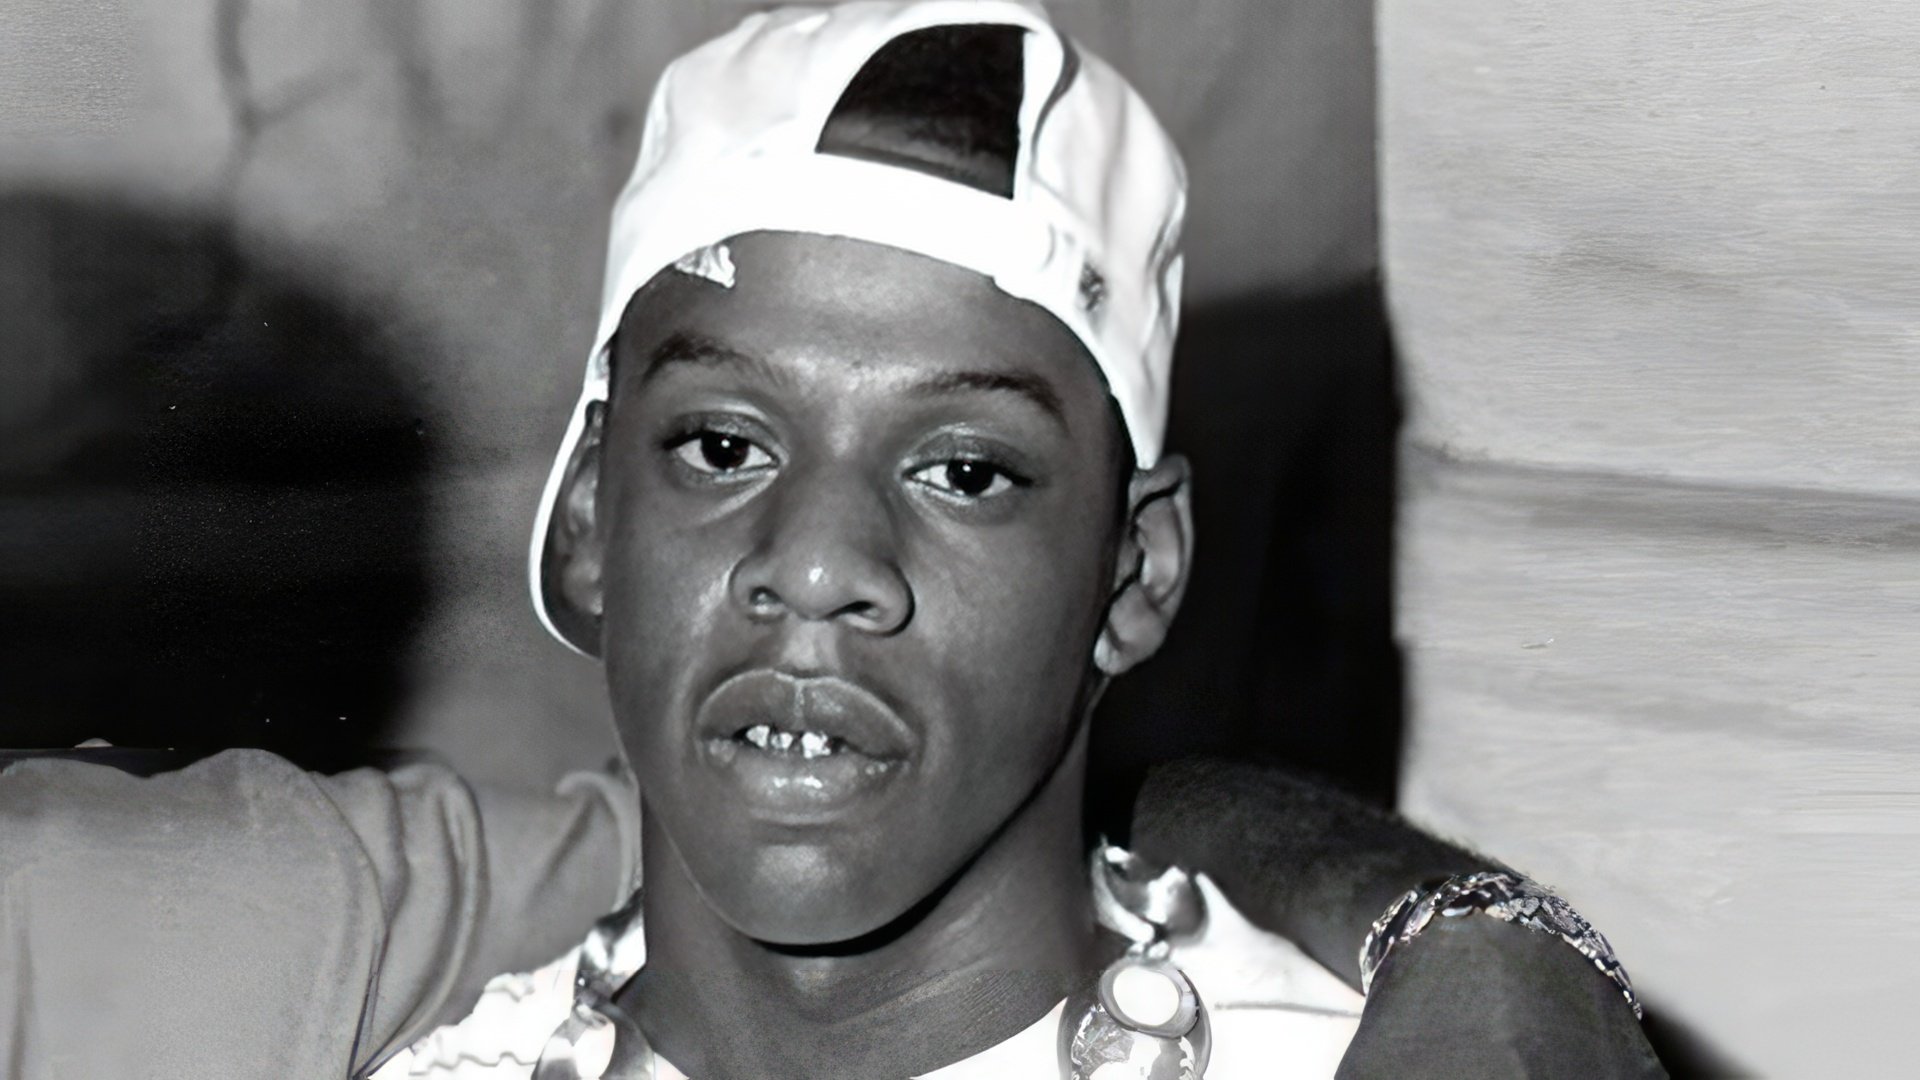 Young Jay-Z